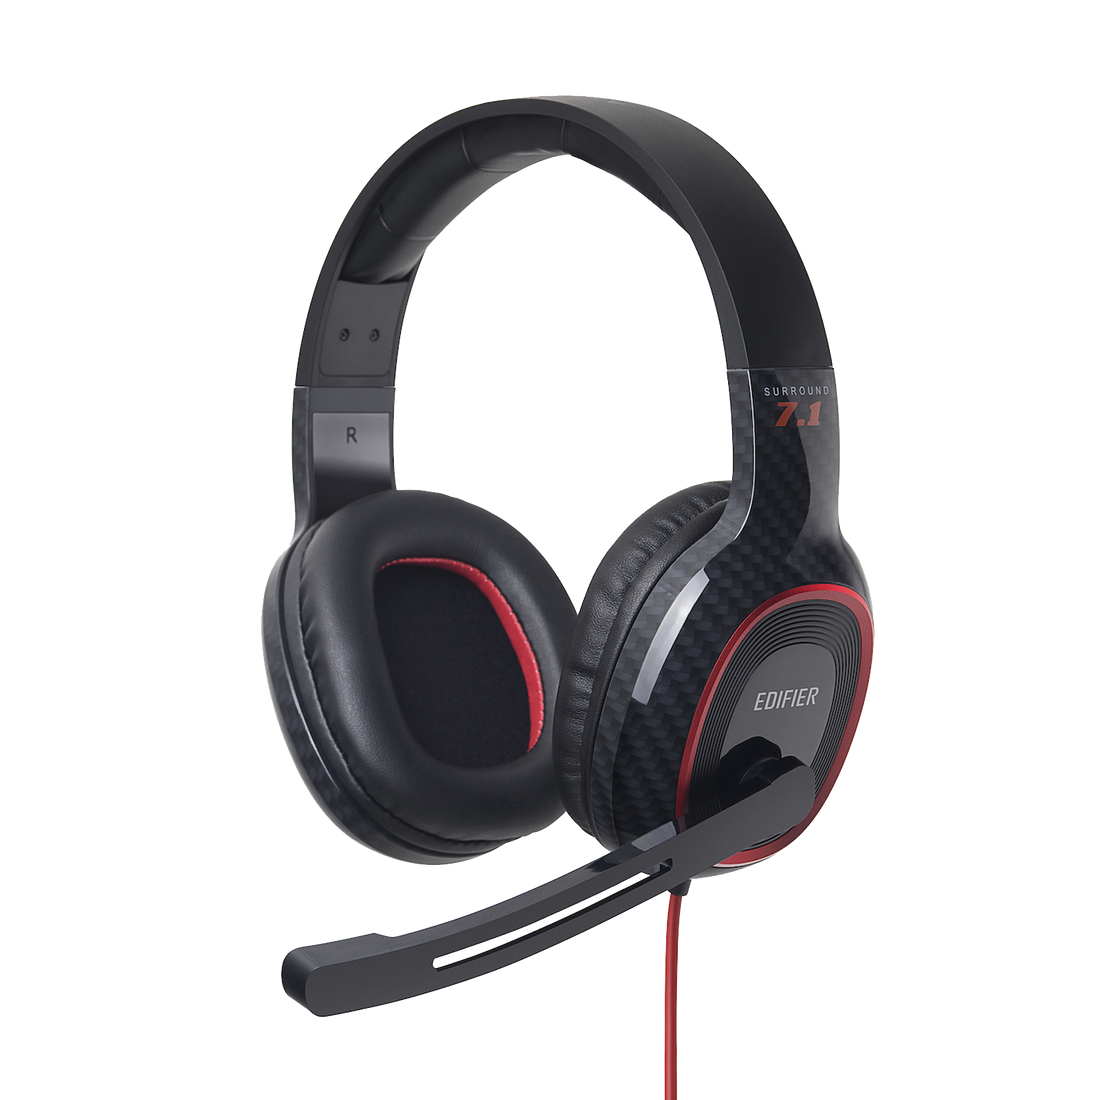 G20 Professional Gaming Headset Boom Microphone Virtual Surround Sound